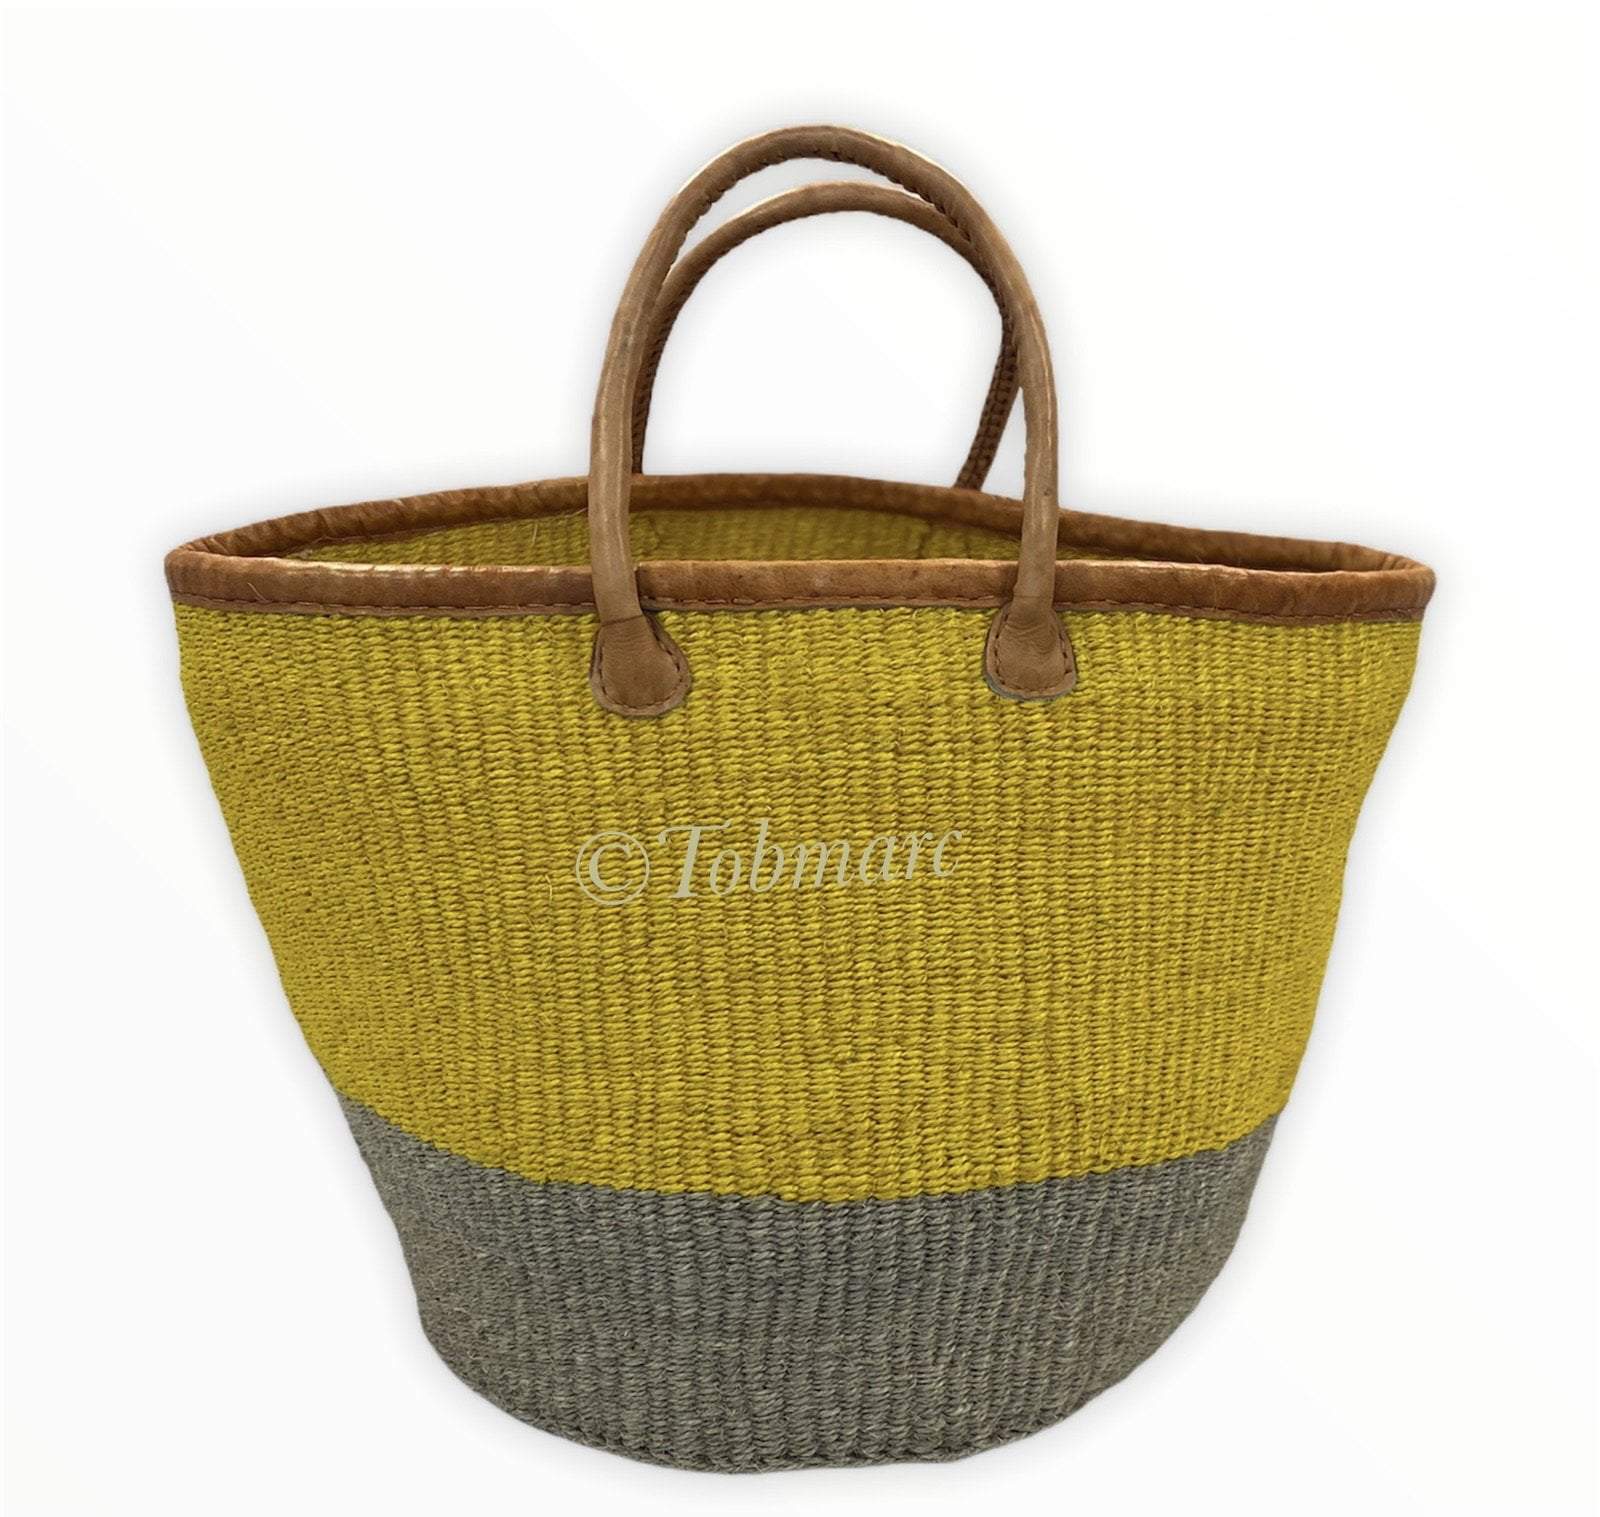 Tobmarc Home Decor & Gifts  Basket SYELGRA-Woven Baskets,Bag with Leather Handles